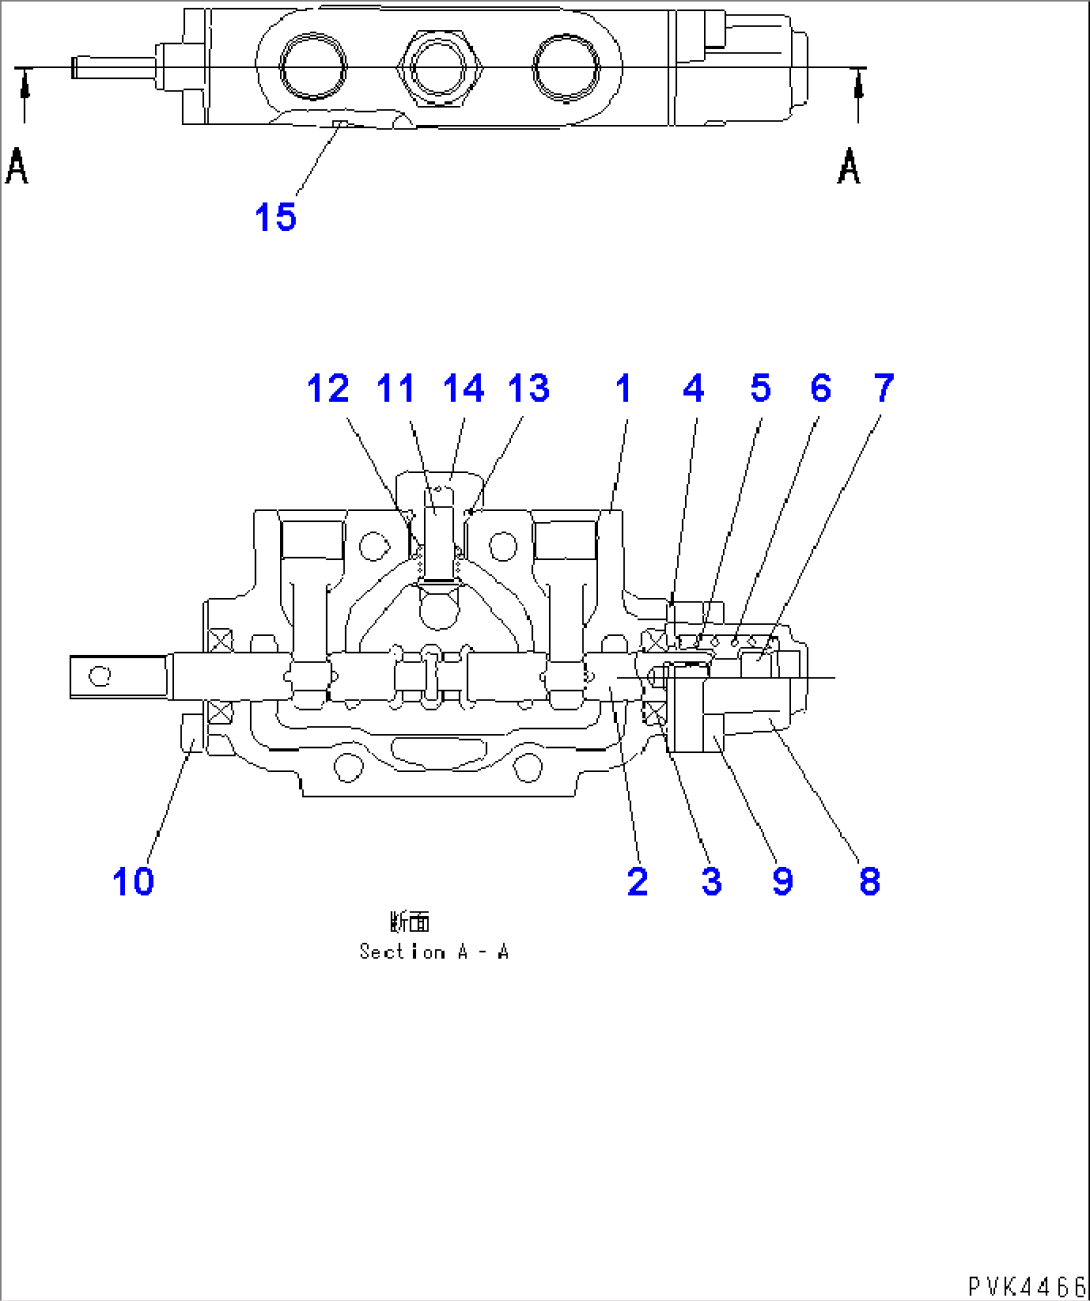 MAIN VALVE (WITH 3-POINT HITCH) (FOR ANGLE)(#80199-)